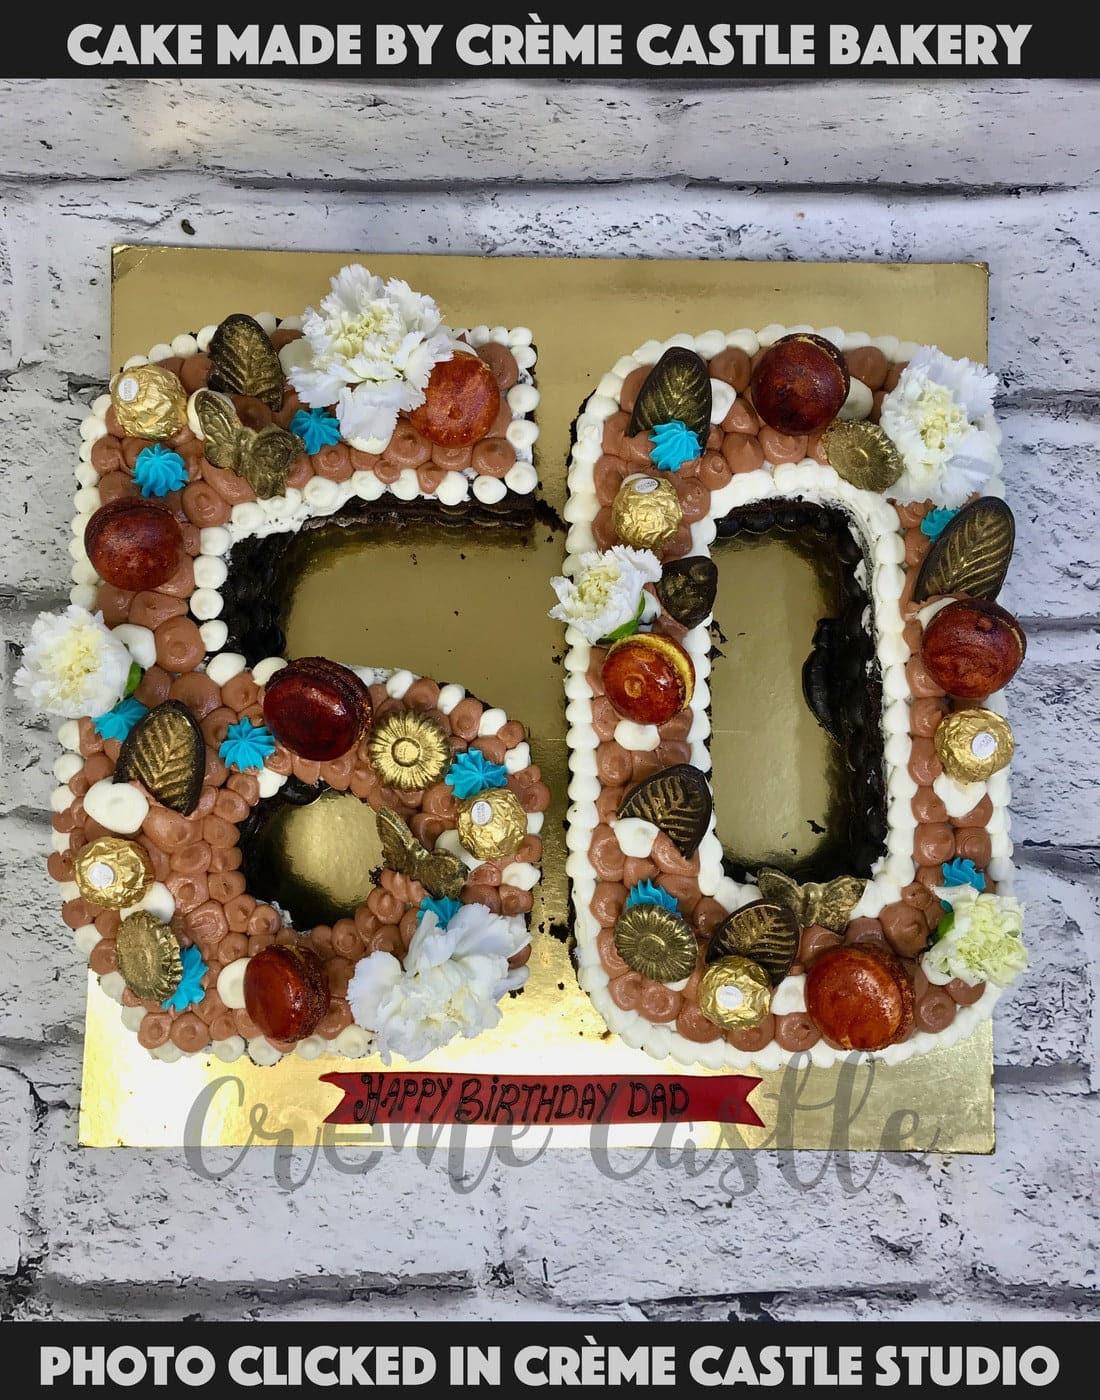 60th Birthday Cake in Open Cake by Creme Castle